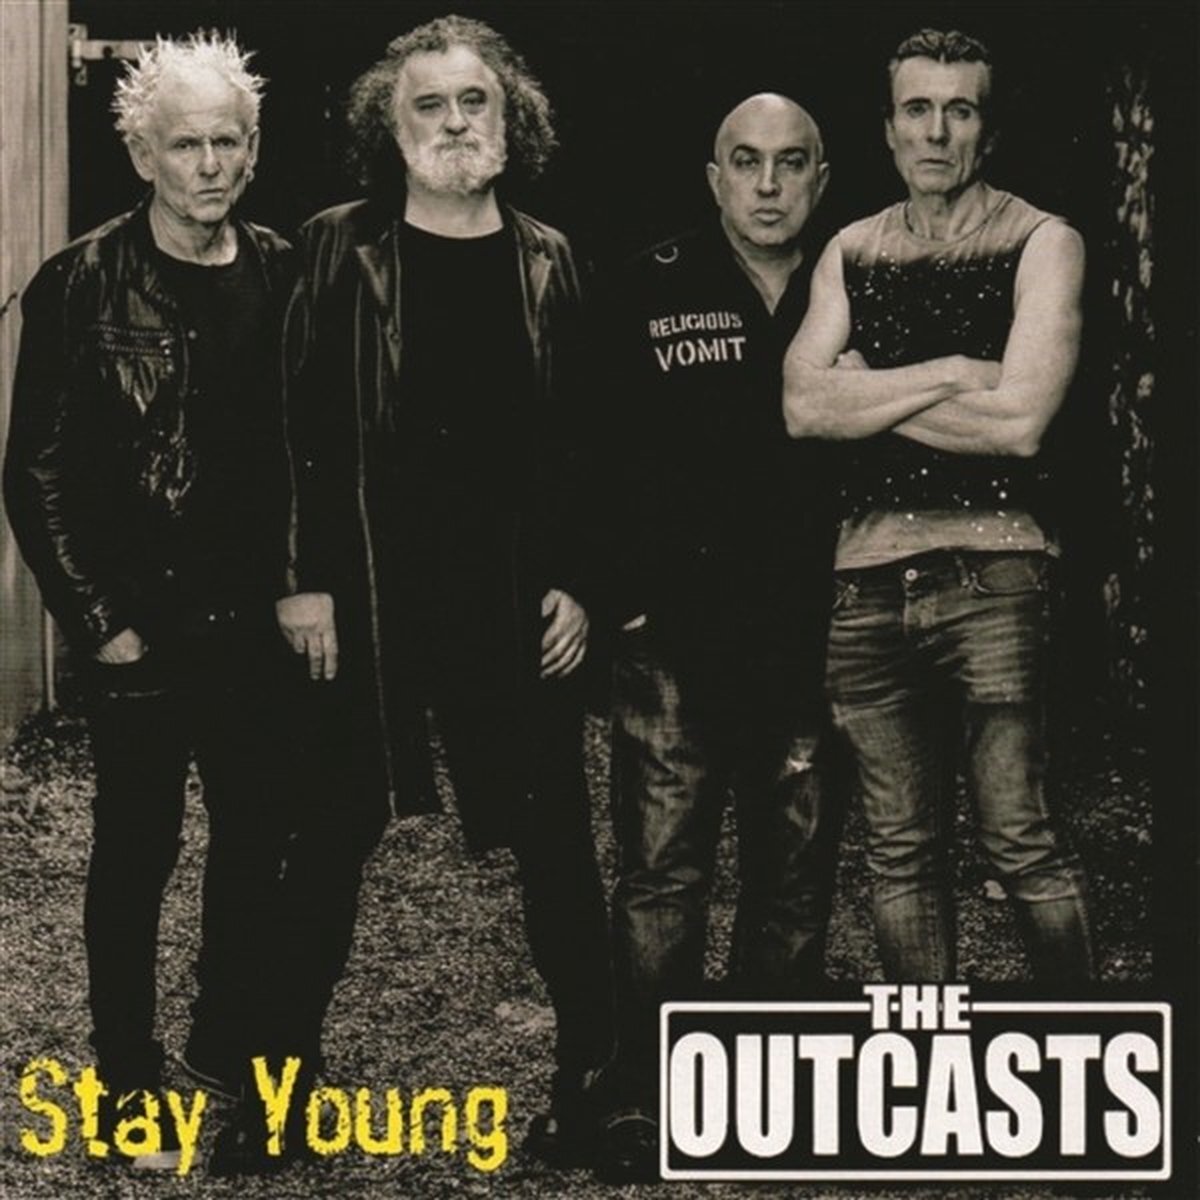 Sonic Rendezvous The Outcasts - Stay Young (7" Vinyl Single)